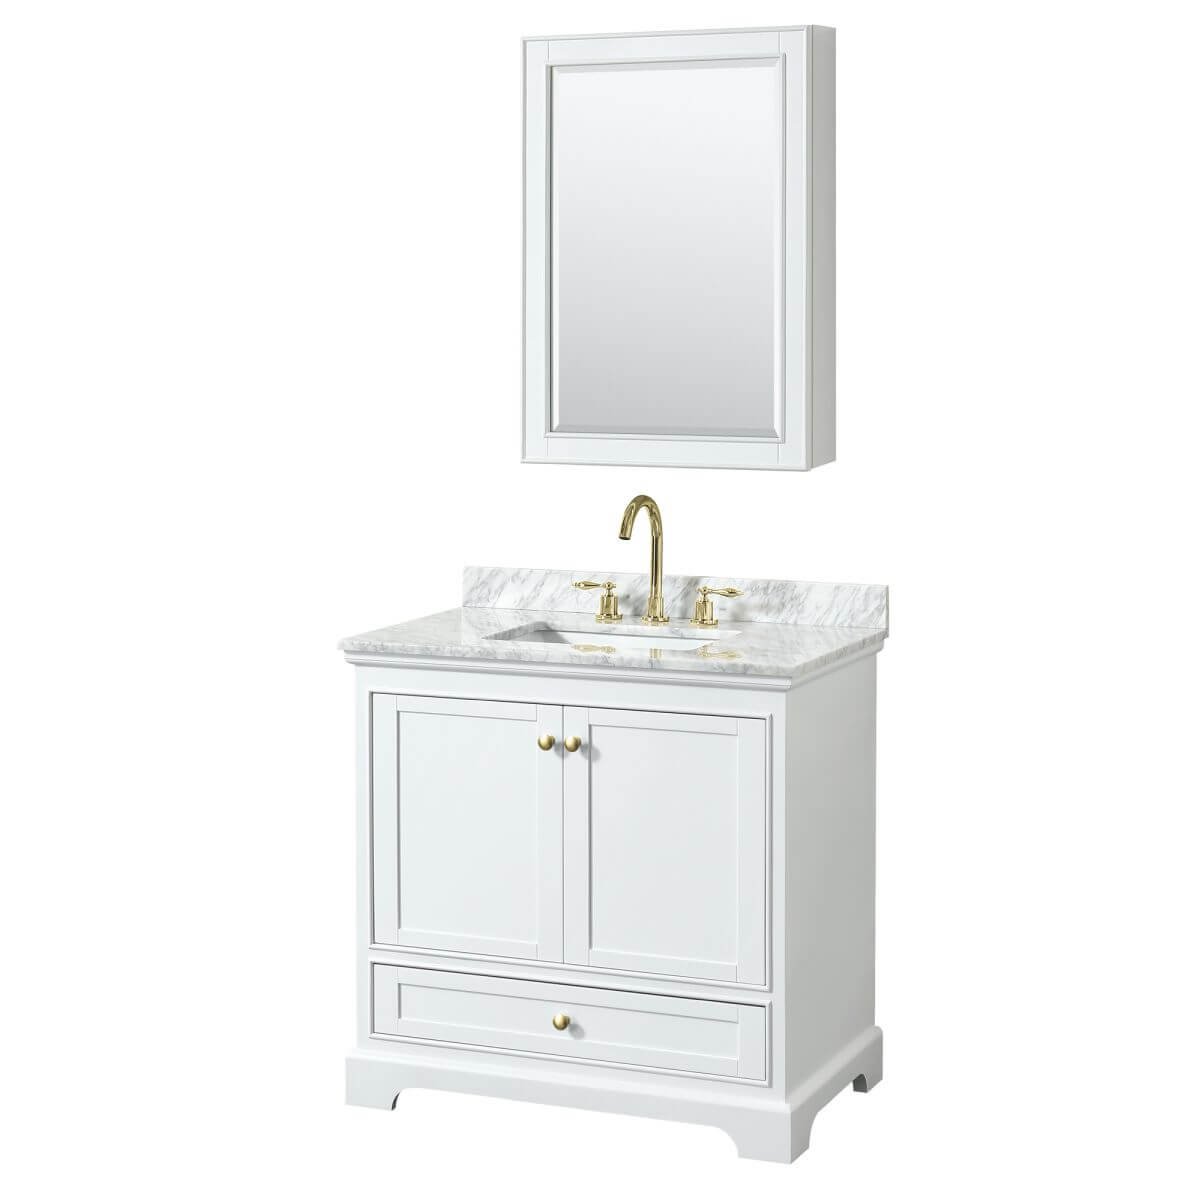 Wyndham Collection Deborah 36 inch Single Bathroom Vanity in White with White Carrara Marble Countertop, Undermount Square Sink, Brushed Gold Trim and Medicine Cabinet - WCS202036SWGCMUNSMED